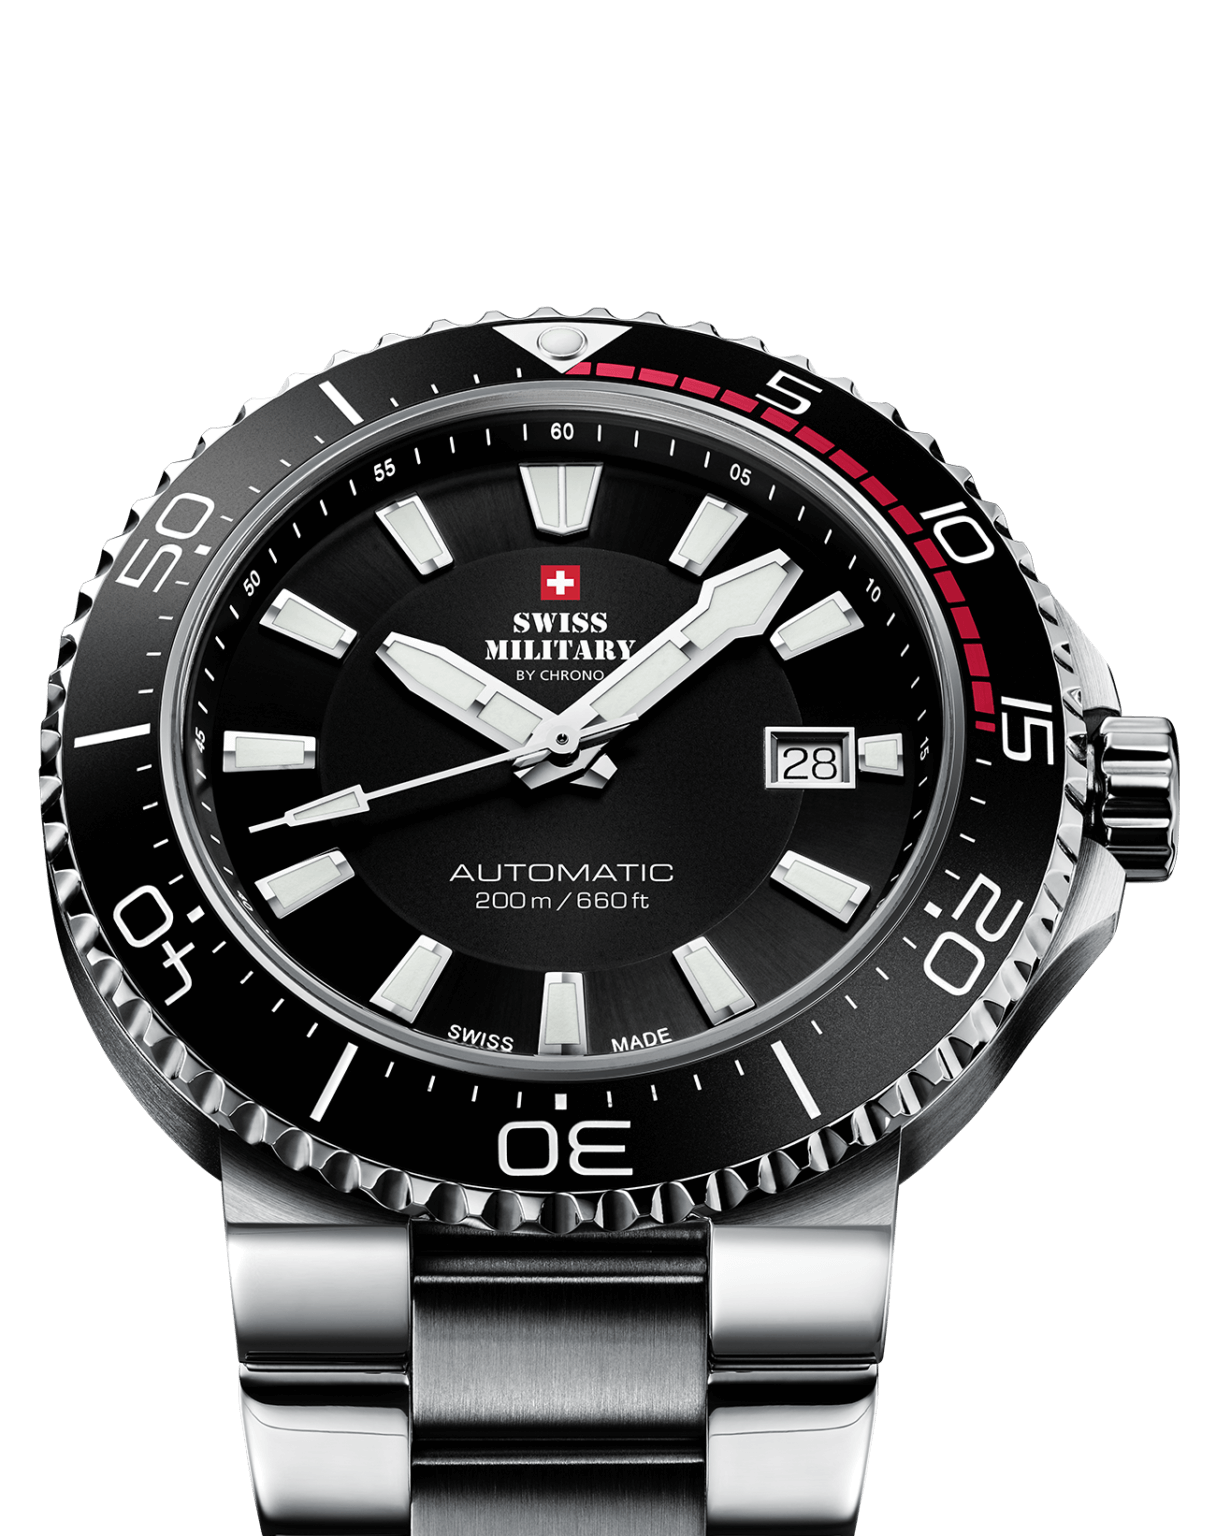 Swiss Military Sma34086 01 Automatic Dive Watch 200m